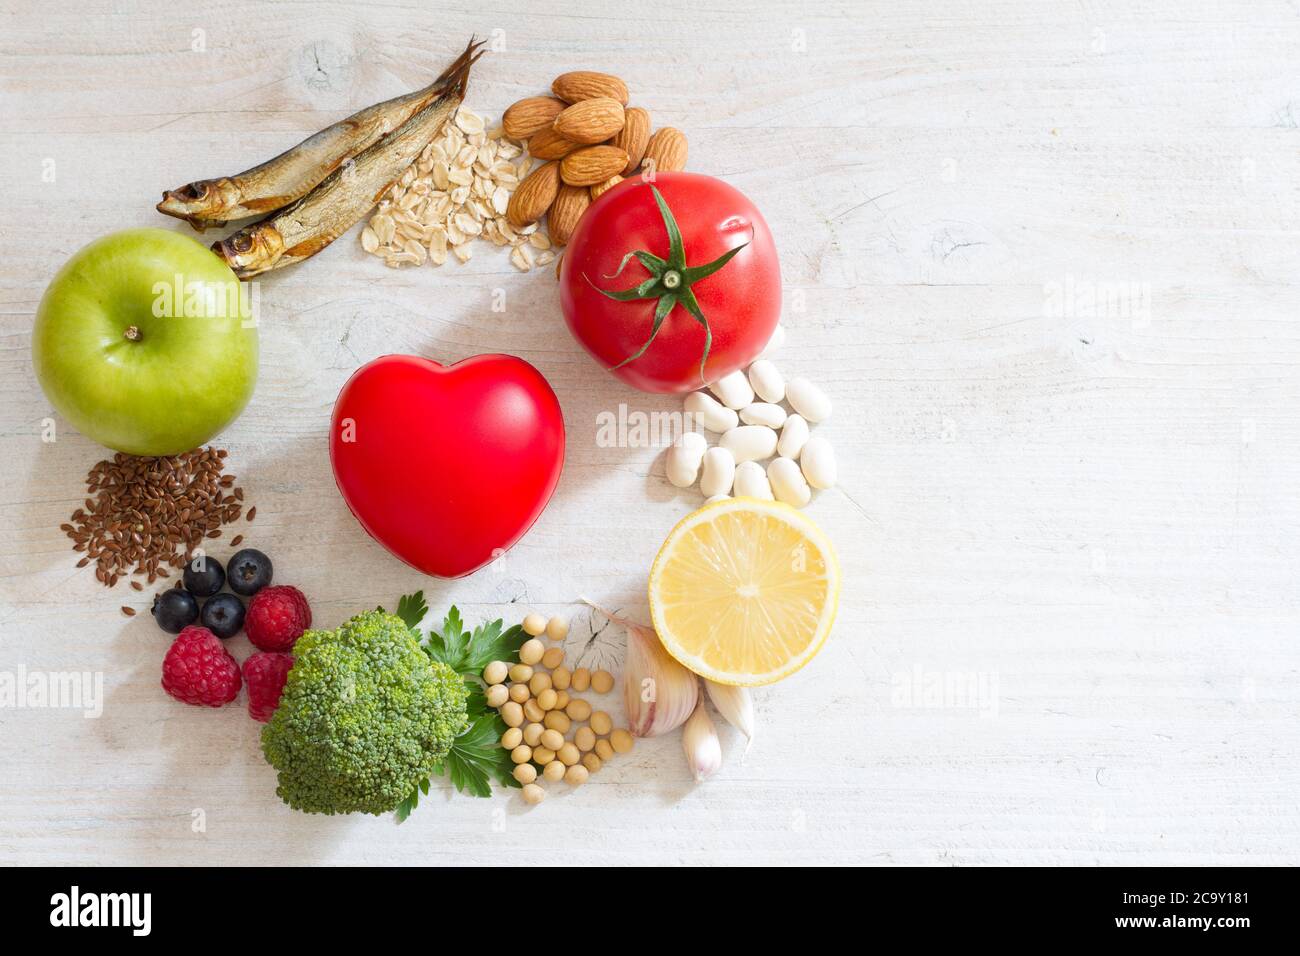 Selection healthy food good for heart, diet concept Stock Photo